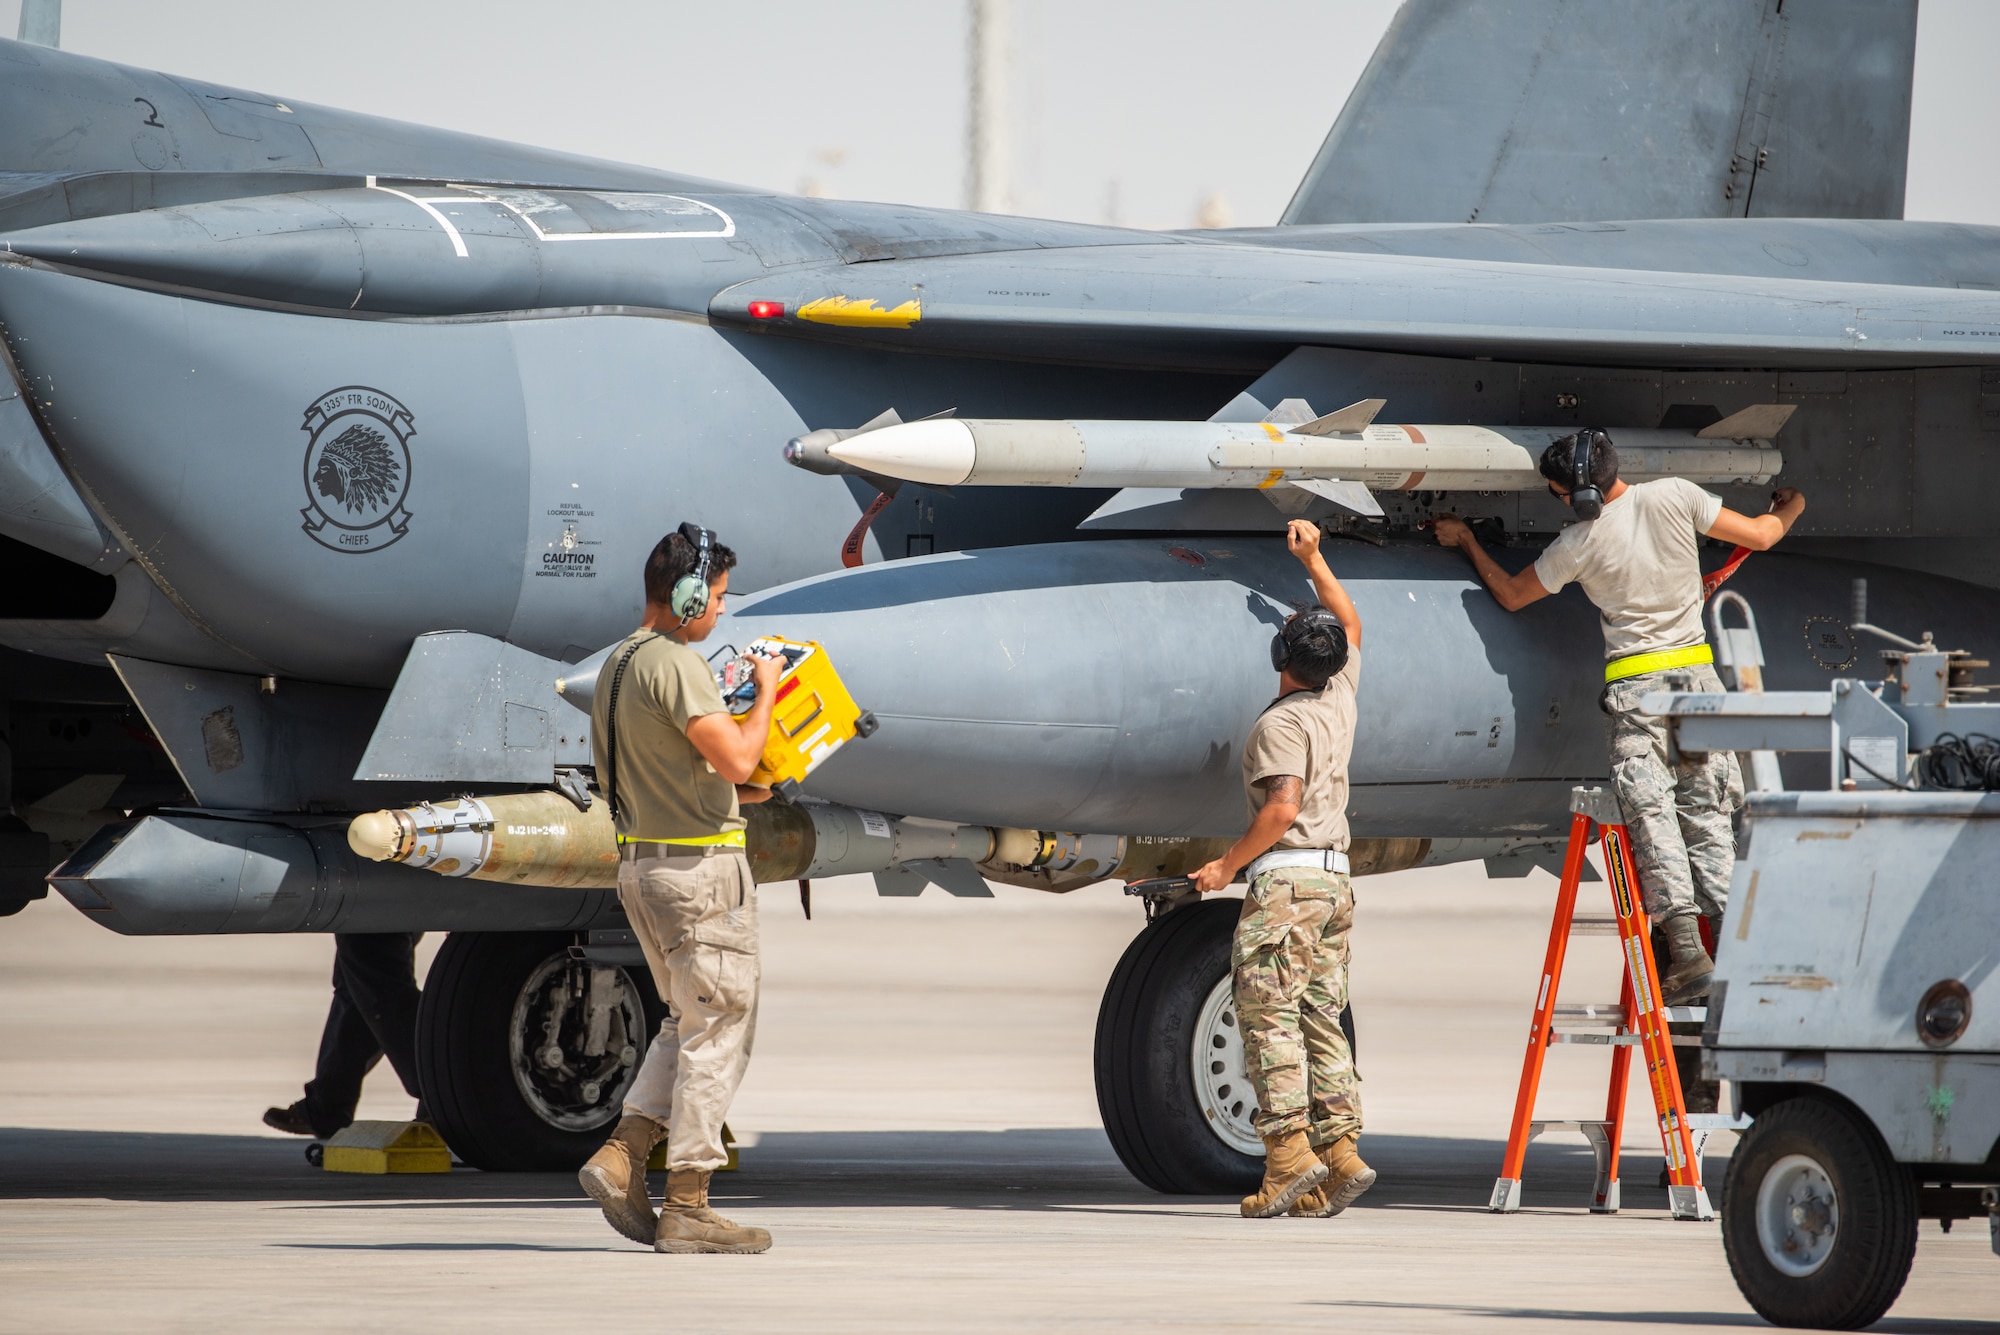 Weapons load crew members arm the munitions on an F-15E Strike Eagle before flight for Agile Strike Sept. 18, 2019, at Al Dhafra Air Base, United Arab Emirates. The 336th EFS sent two aircraft and personnel to operate missions out of Prince Sultan Air Base, Saudi Arabia to challenge their flexibility at expanding tactical and strategic reach while strengthening coalition and regional partnerships in the Air Forces Central Command area of responsibility through adaptive basing. (U.S. Air Force photo by Staff Sgt. Chris Thornbury)